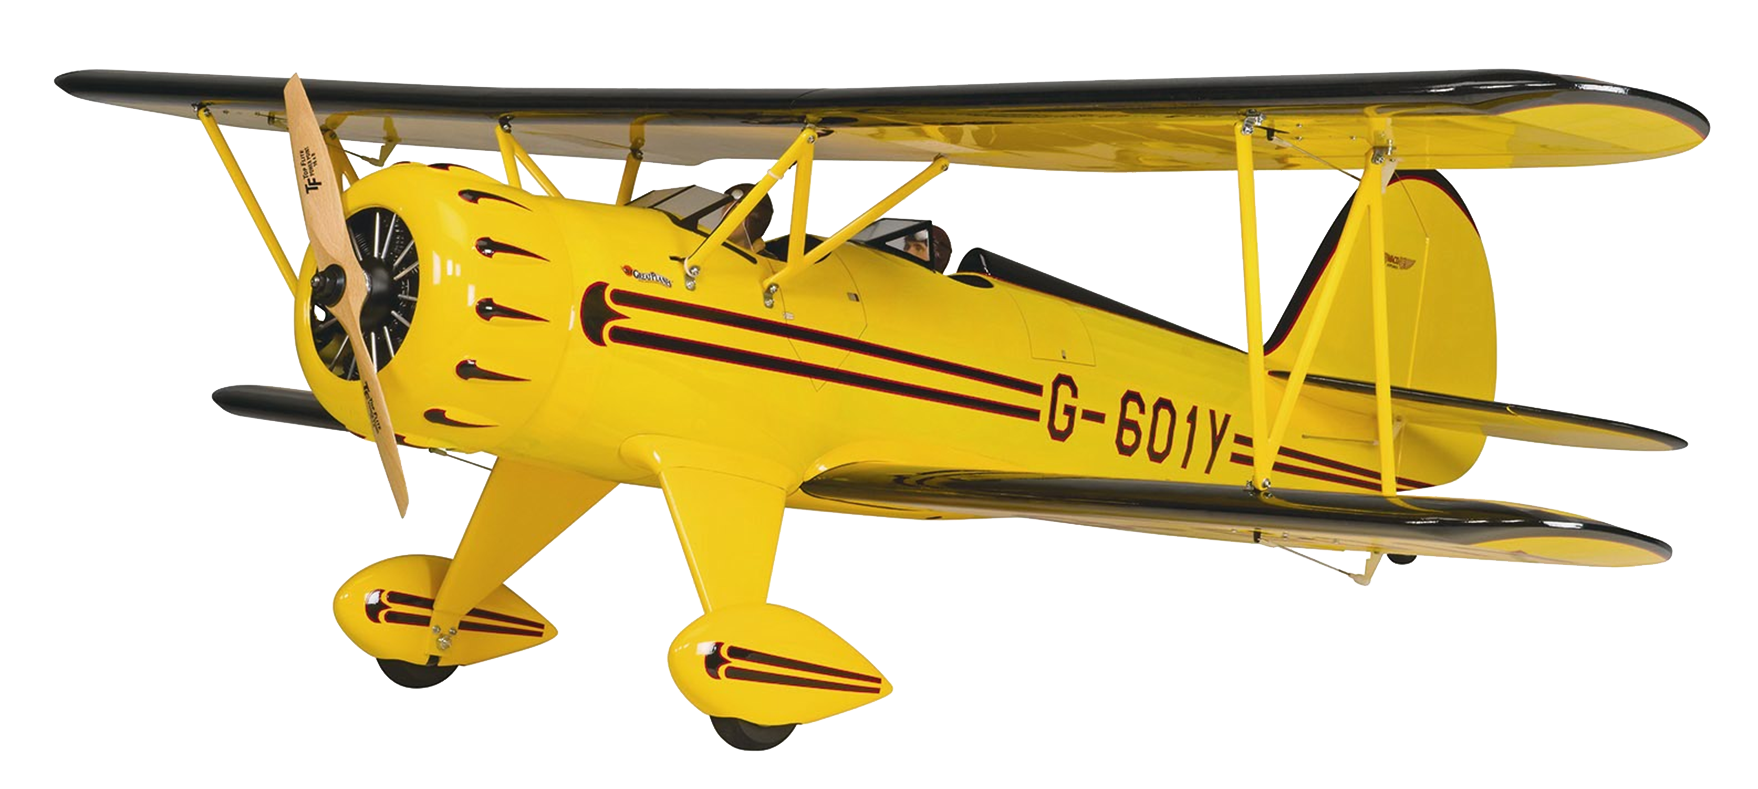 Images of Biplane | 1758x789